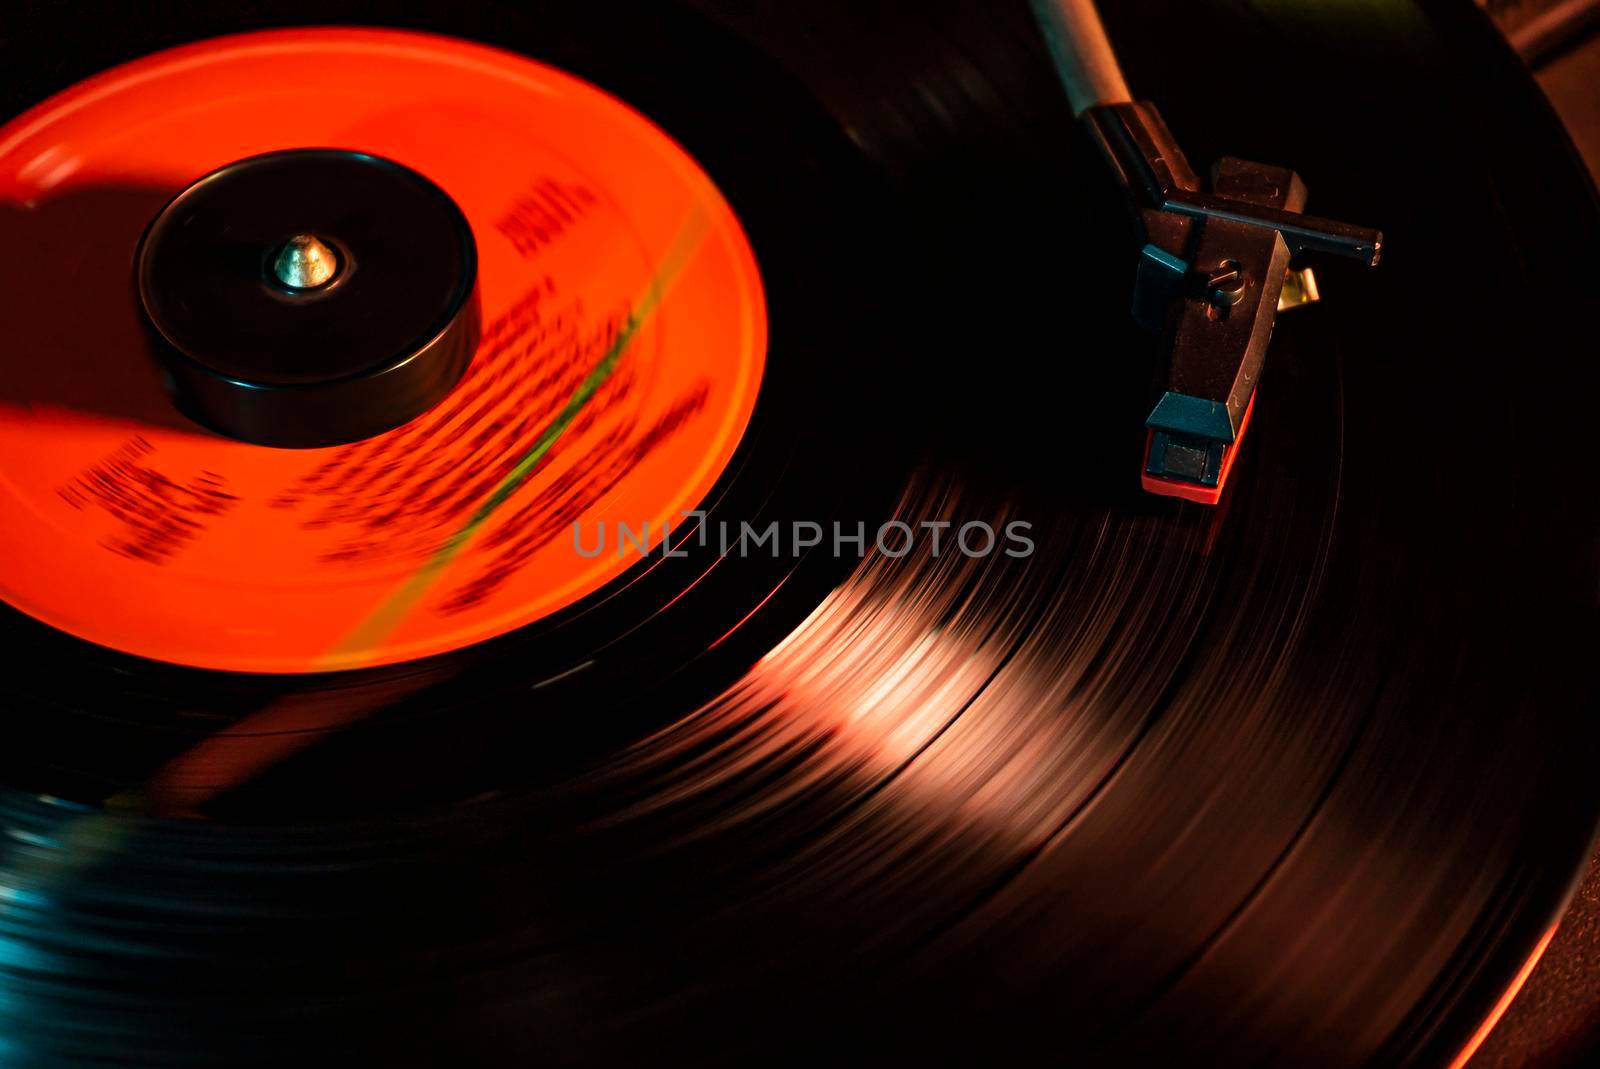 Turntable with vinyl record 17 by pippocarlot